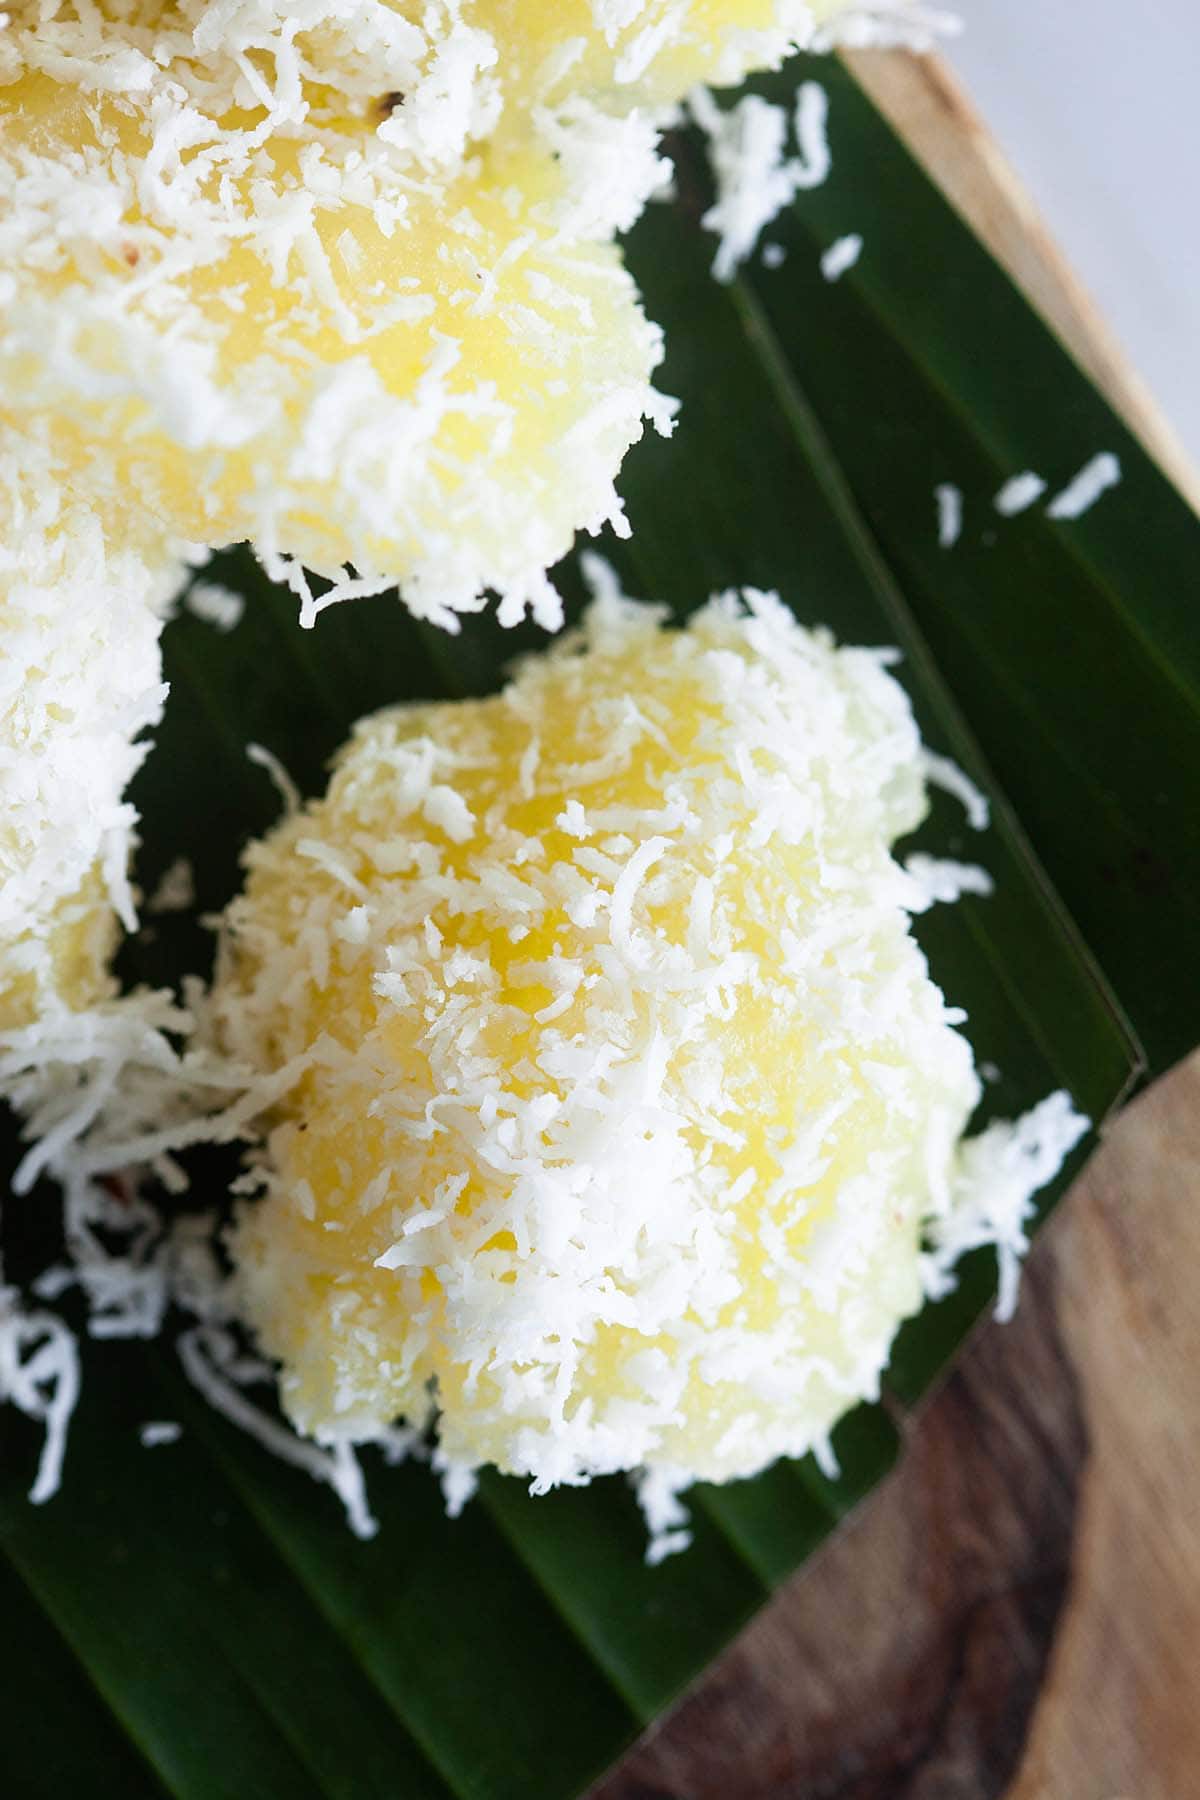 Cassava coated with shredded coconut.